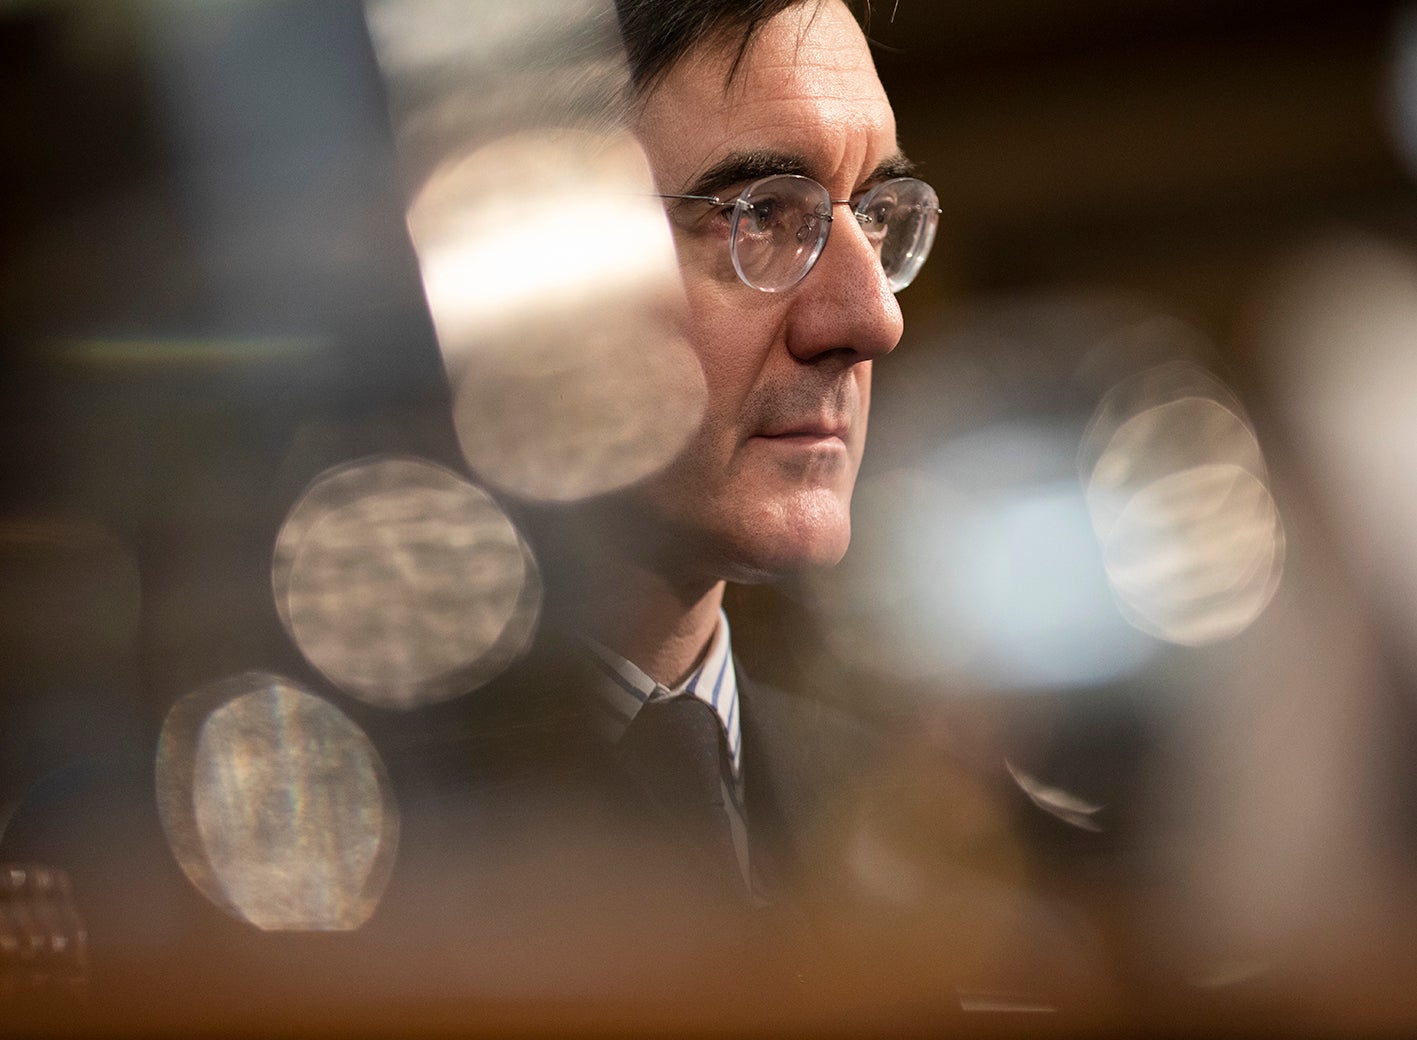 Jesus could teach Jacob Rees-Mogg a thing about immigrants